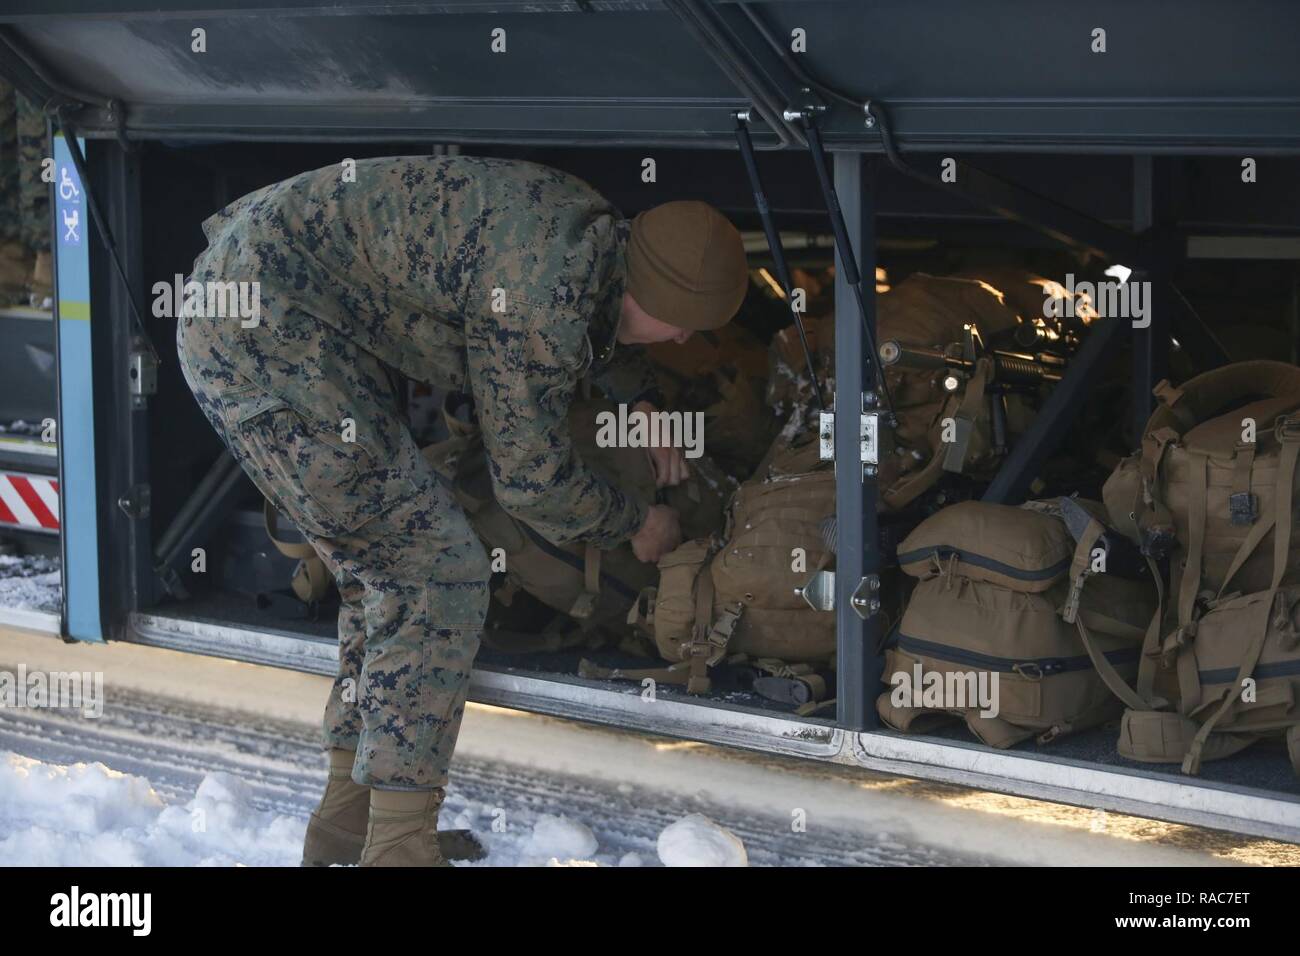 A U.S. Marine places his pack under the bus shortly after their plane landed at Vaernes Garnison, Norway, Jan. 16, 2017. The Marines with Black Sea Rotational Force arrived at Vaernes Garnison early in the morning as part of Marine Rotational Force Europe 17.1. Stock Photo